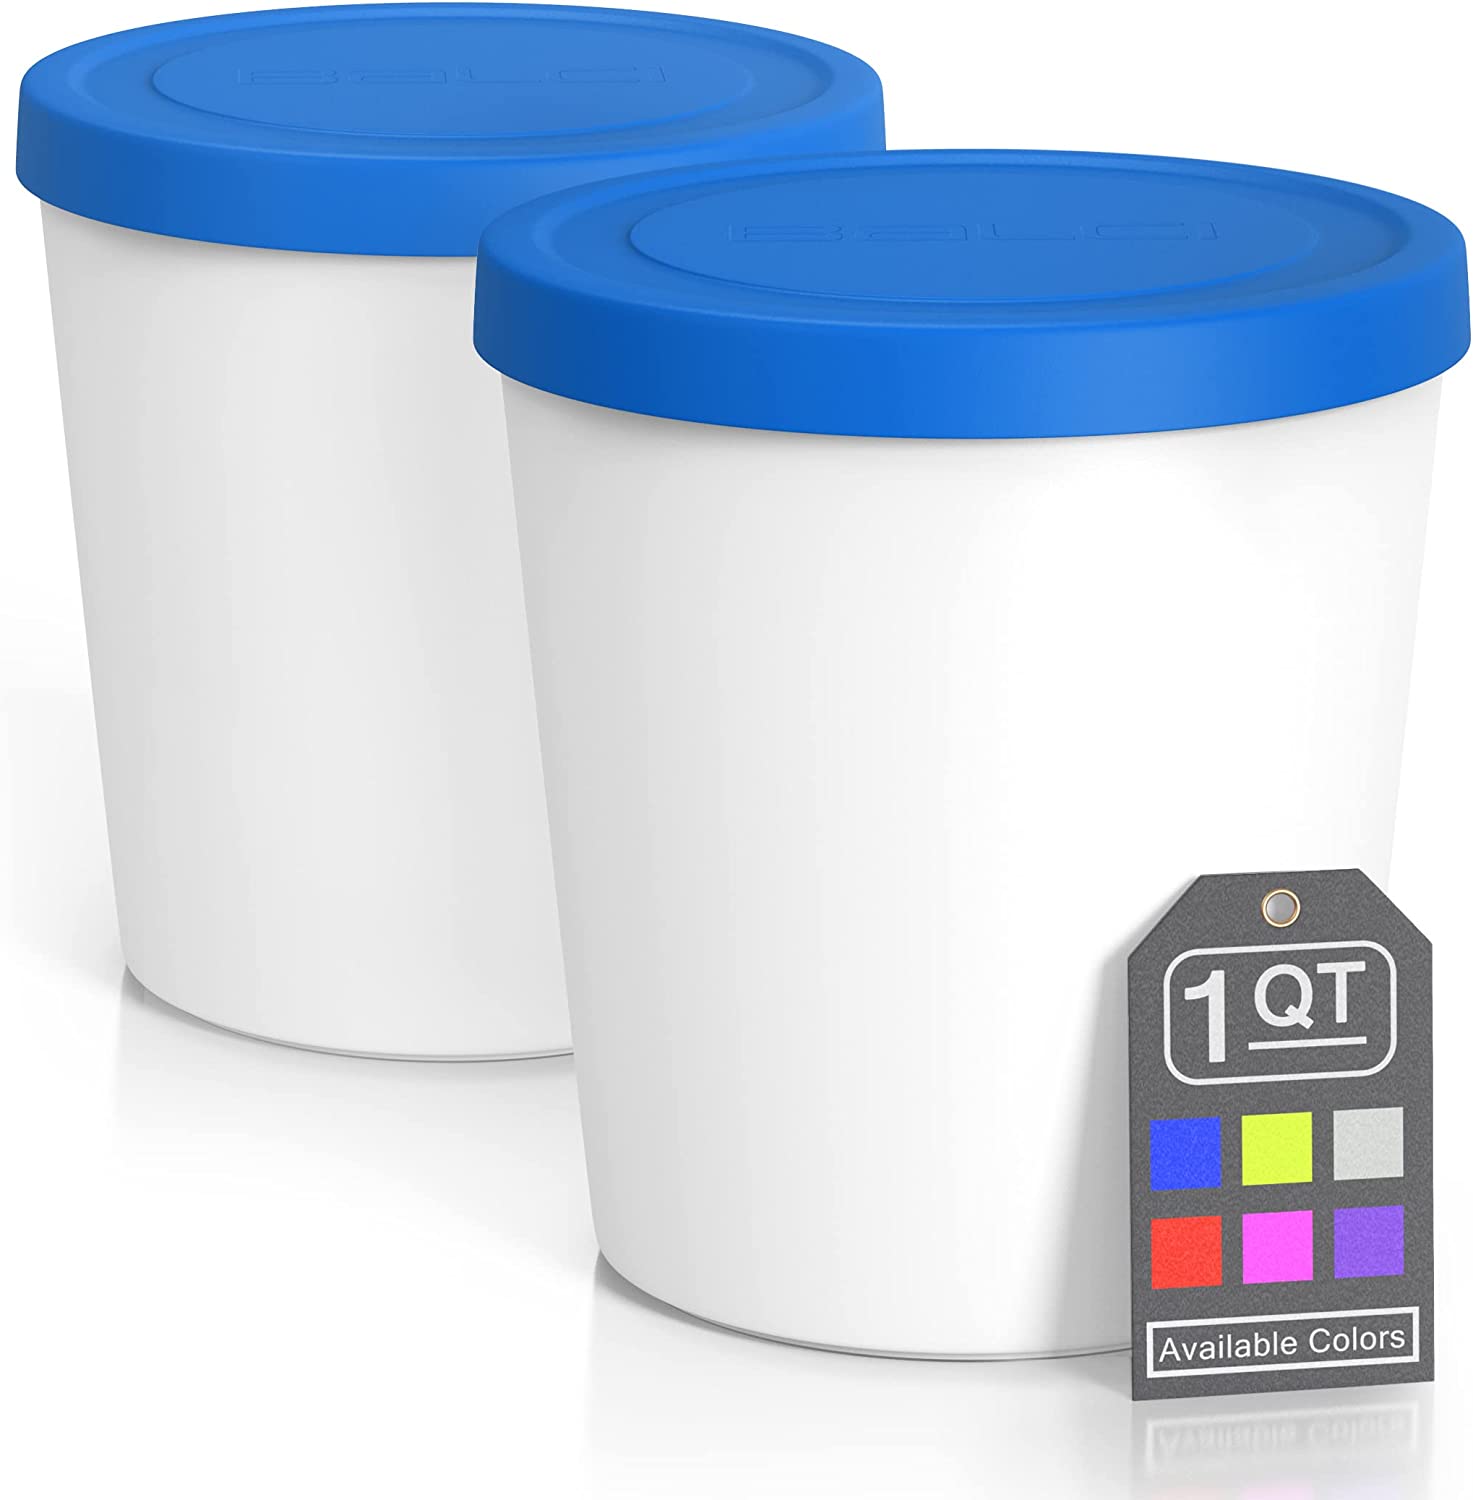 BALCI Reusable Silicone Lids Ice Cream Containers, 2-Pack